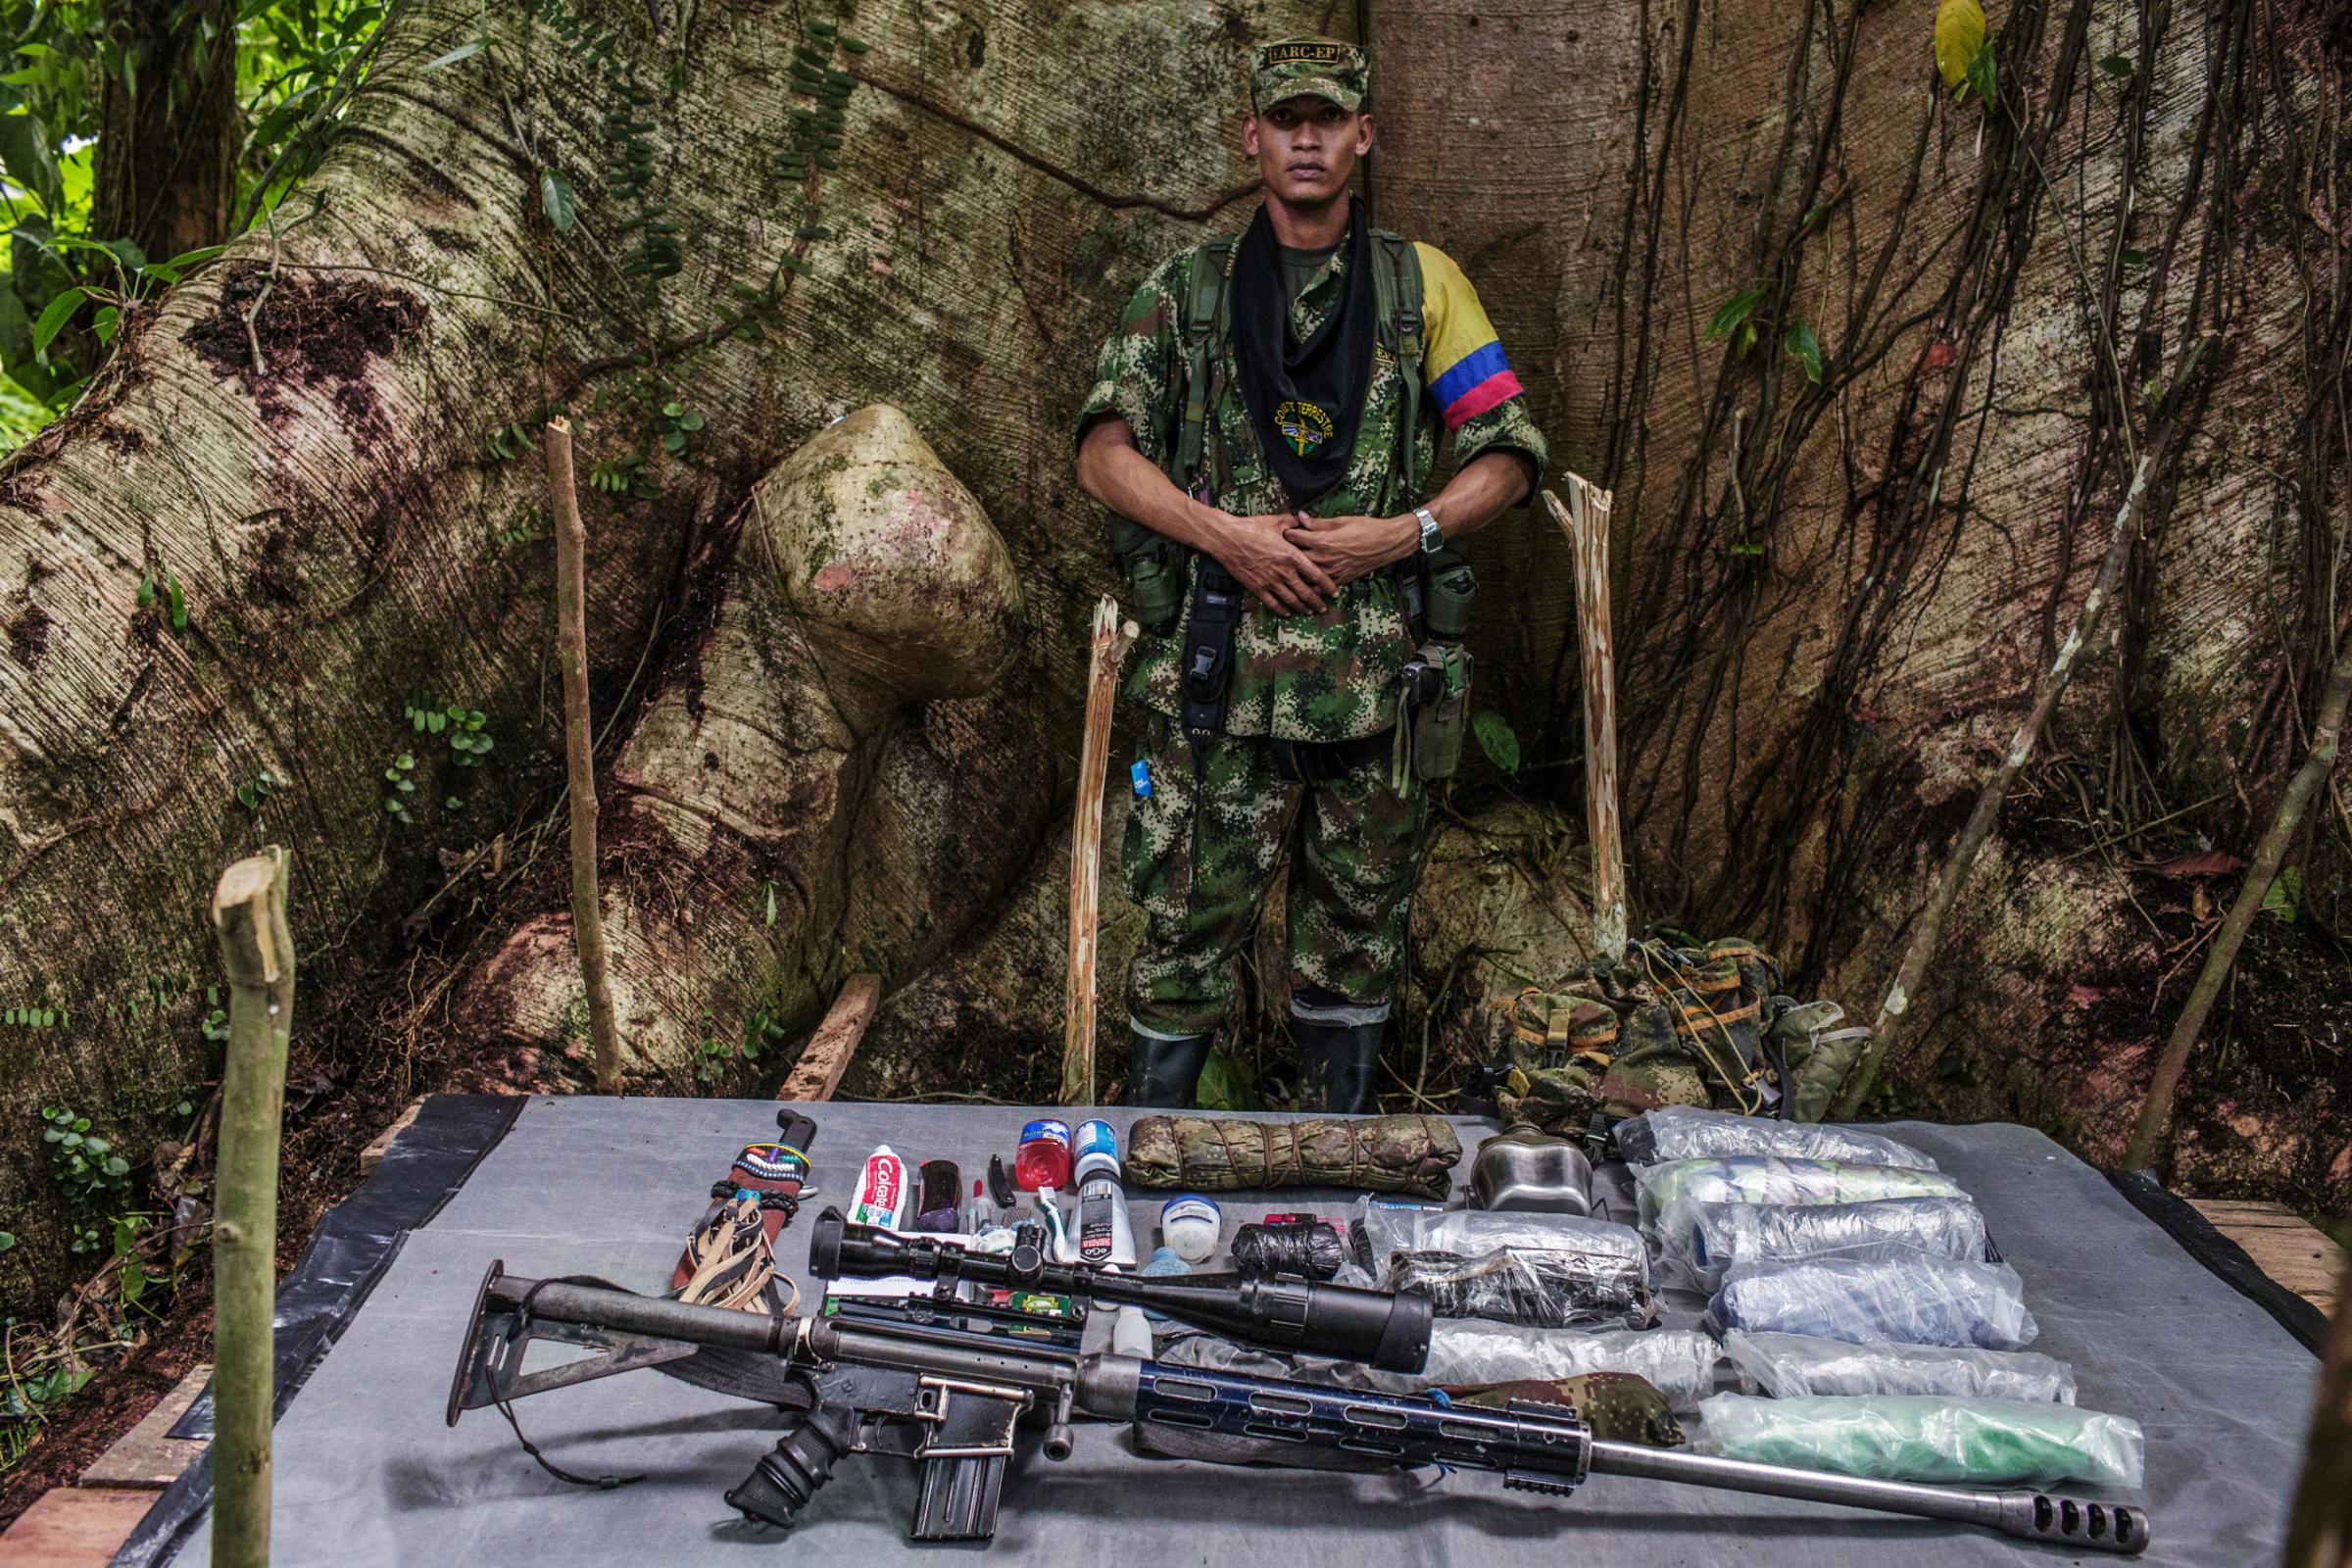 "Oswaldo," 22-years old, has been with FARC for 10 years. Because OswaldoÕs position is on the frontline, he is armed with heavy artillery. His weapon is handcrafted to combine a .50 rifle and a machine gun.